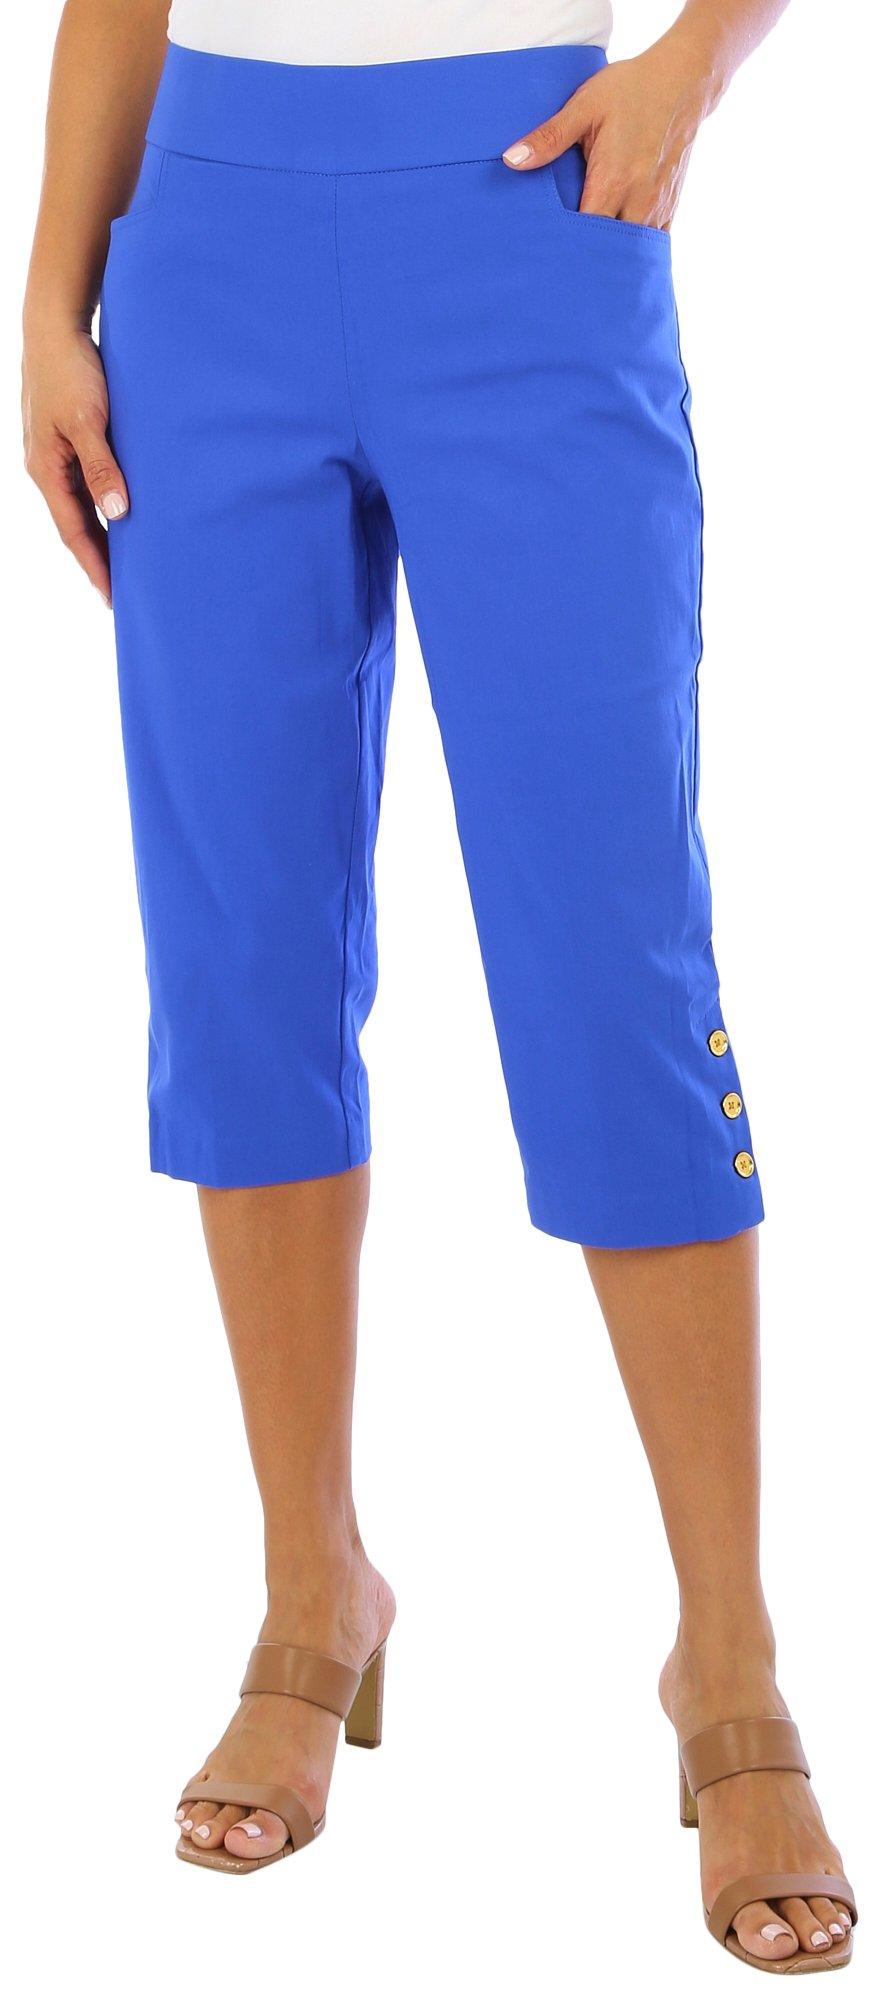 Coral Bay Petite Solid Color 18 in. Mill Capris